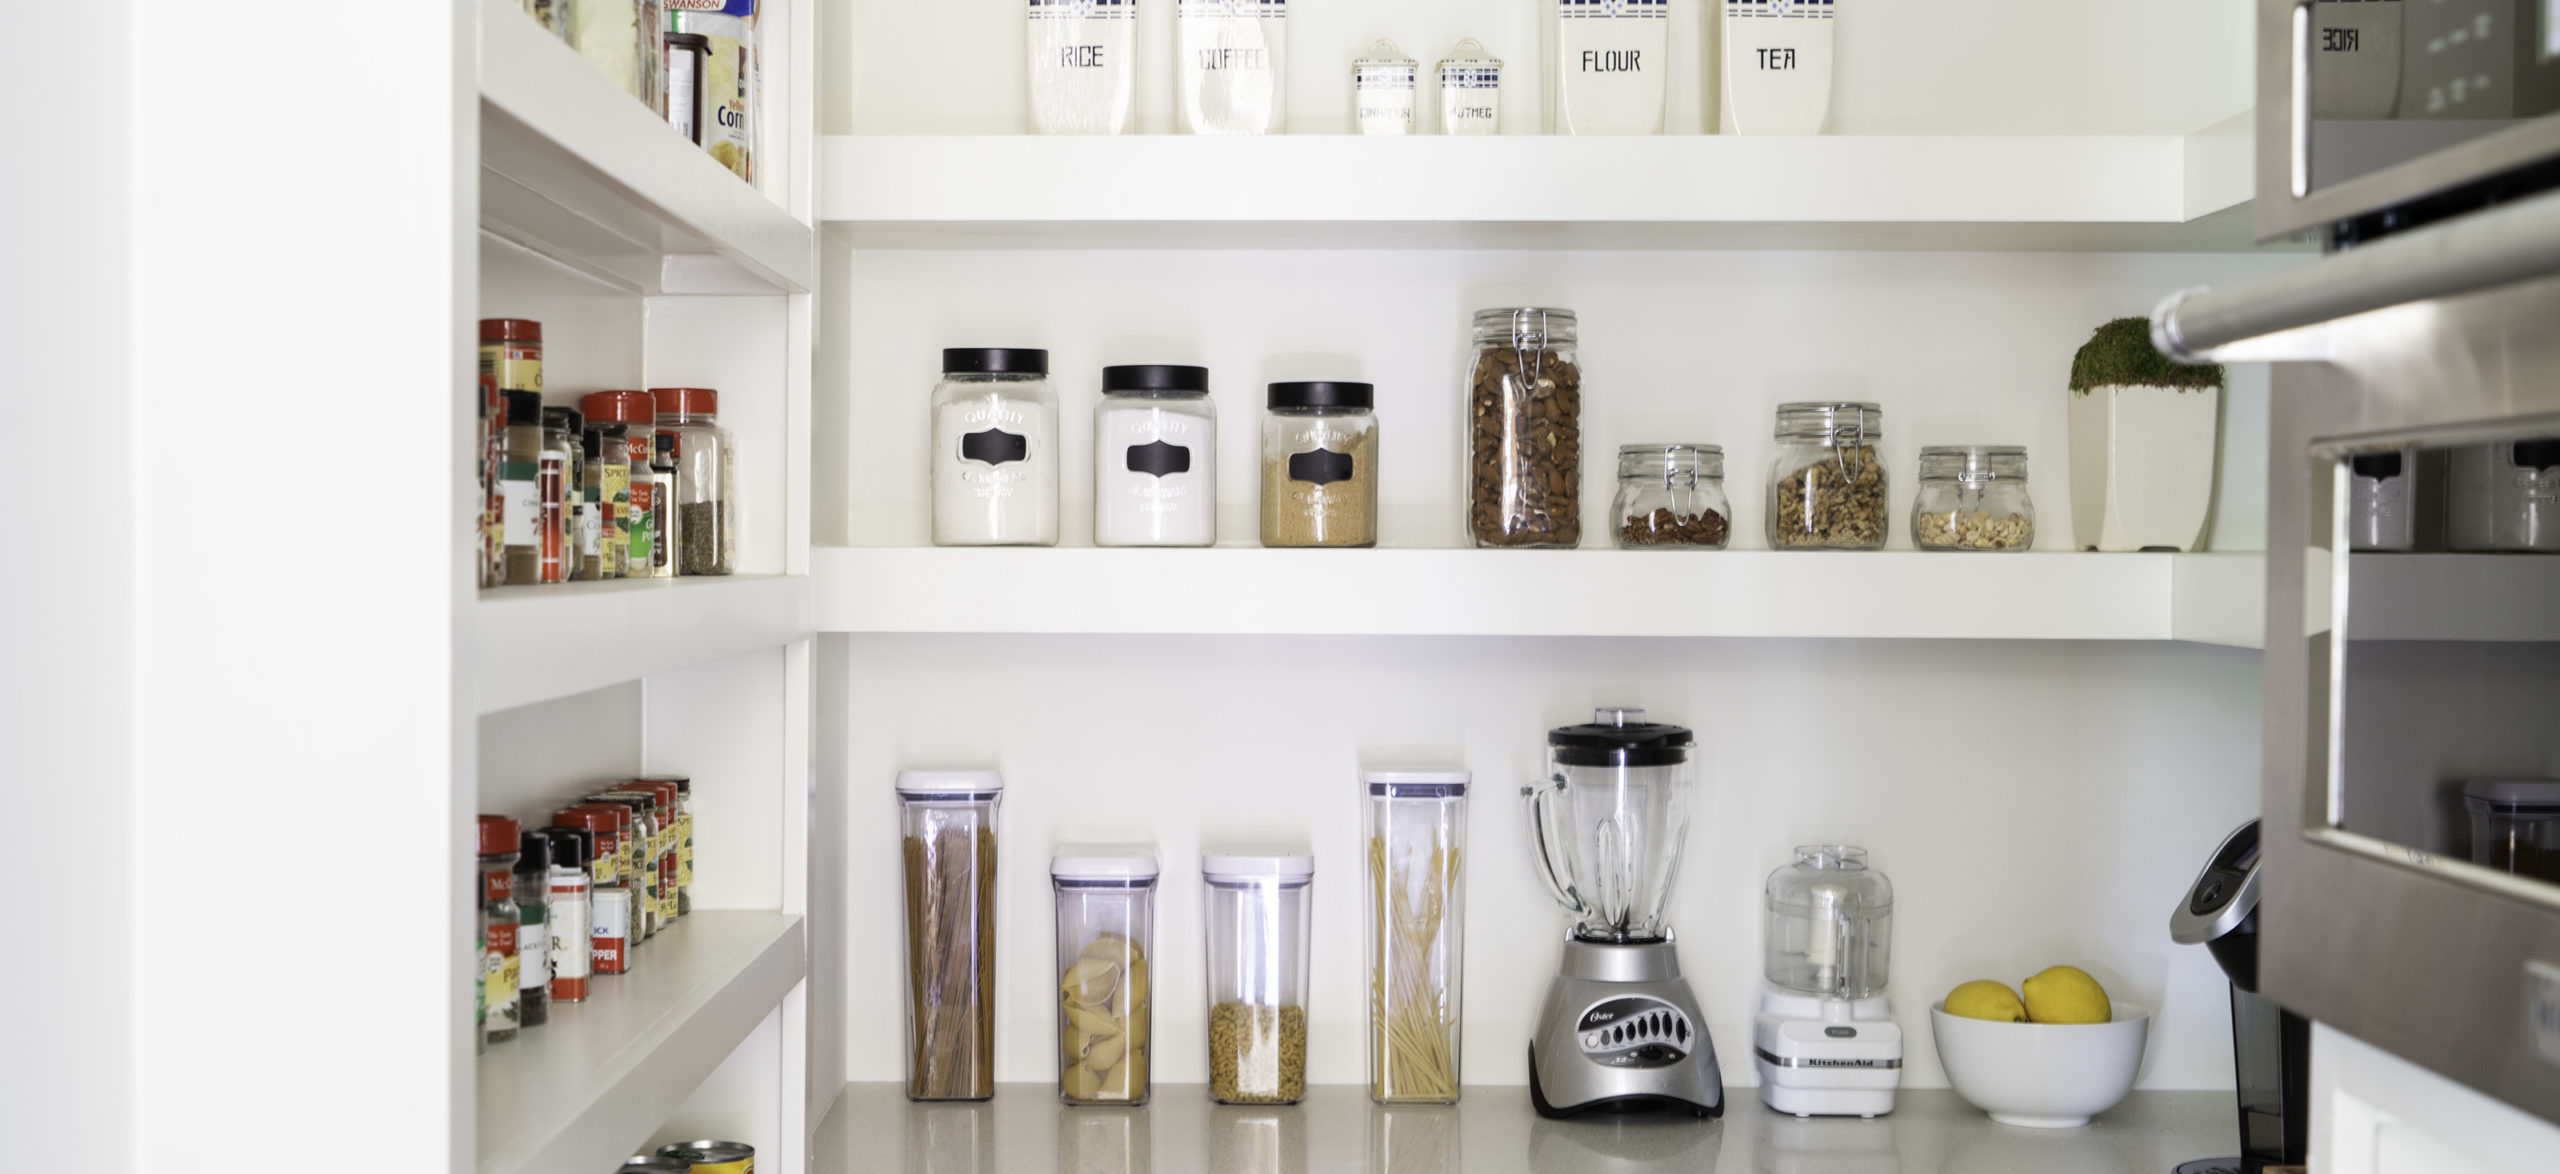 https://abbymurphyphoto.com/wp-content/uploads/2020/07/Featured-How-To-Organize-Your-Pantry-Abby-Murphy-Blog-scaled.jpg